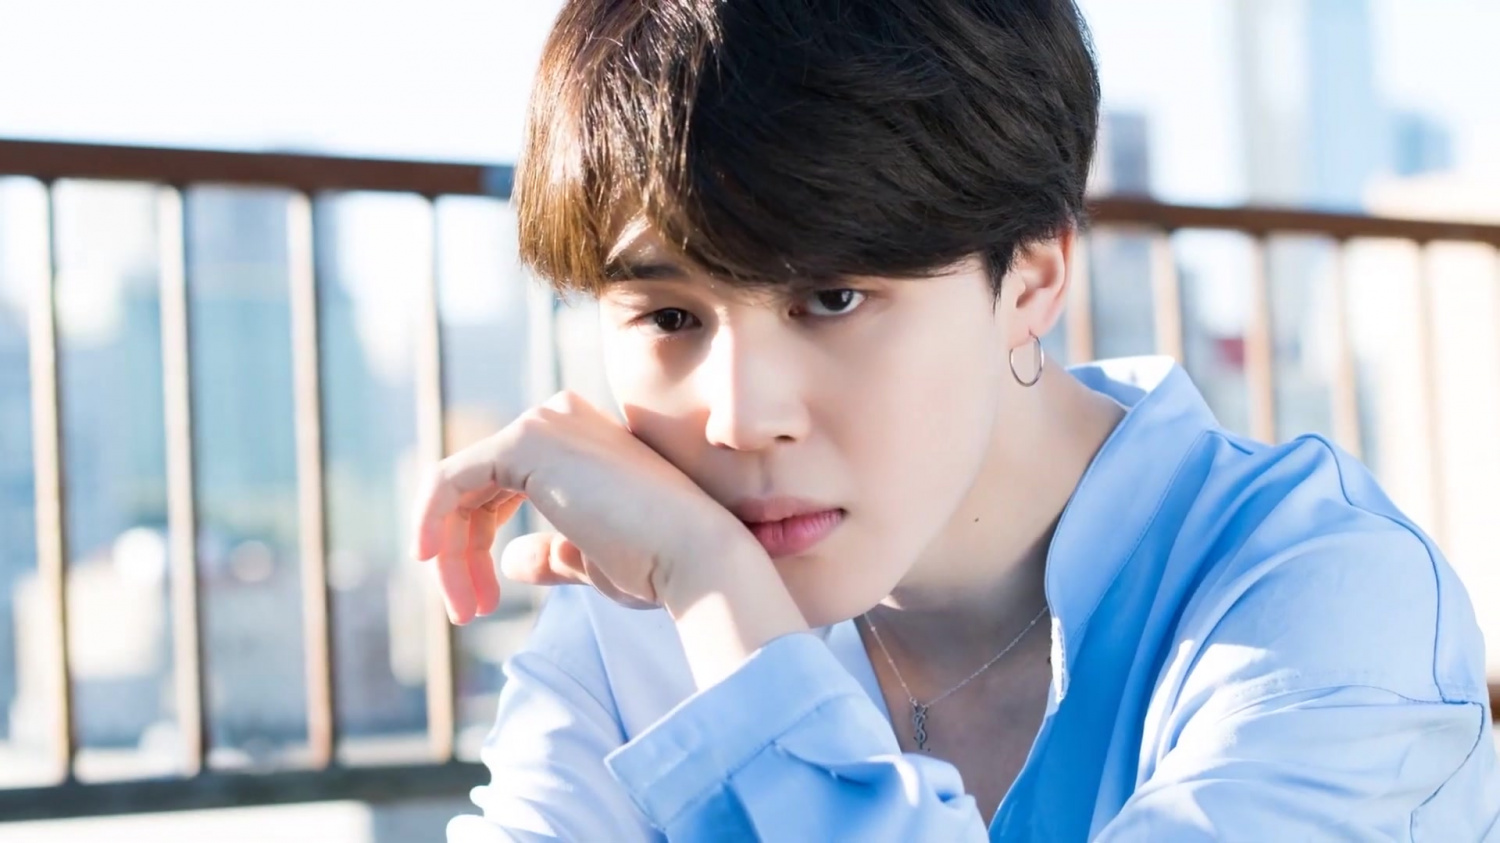 BTS Jimin Heartbreak: Singer Shares Sad Reality Of Being An Idol During